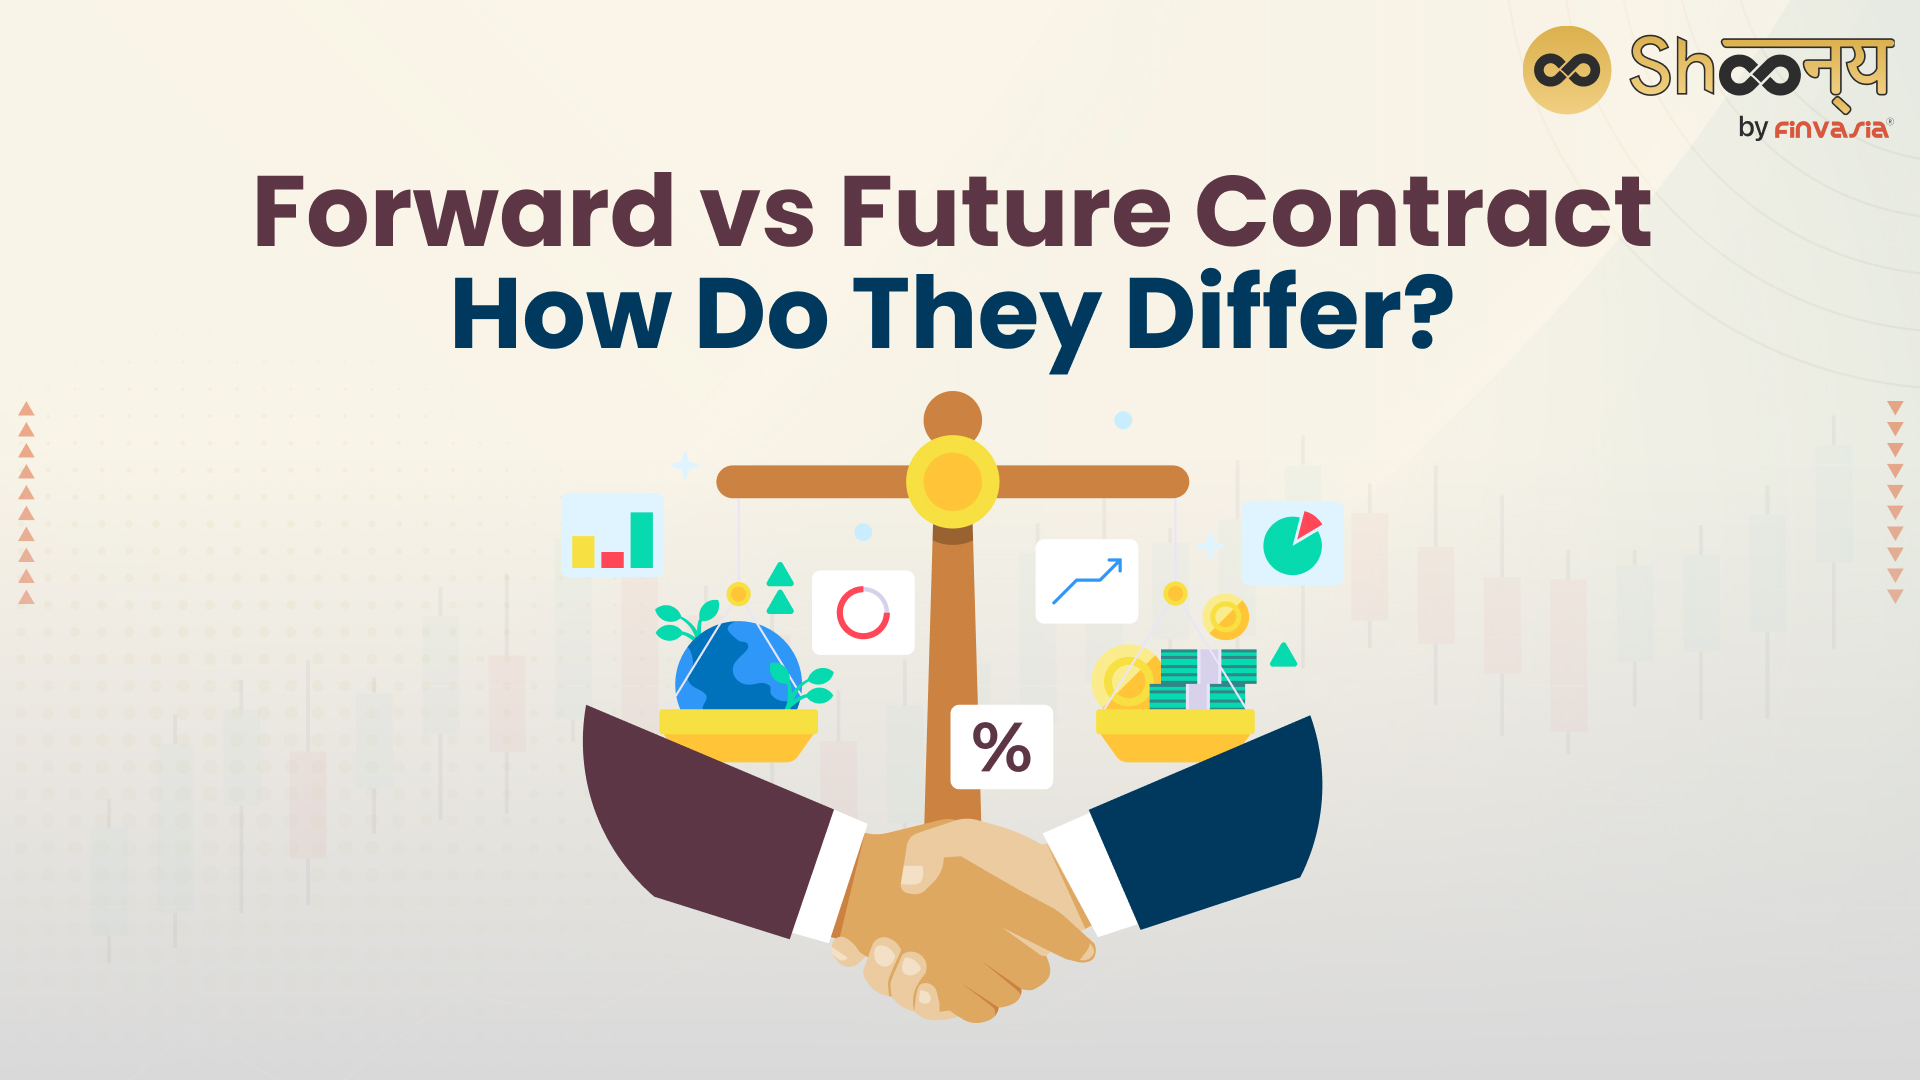 What is the Key Difference Between Forward and Future Contract